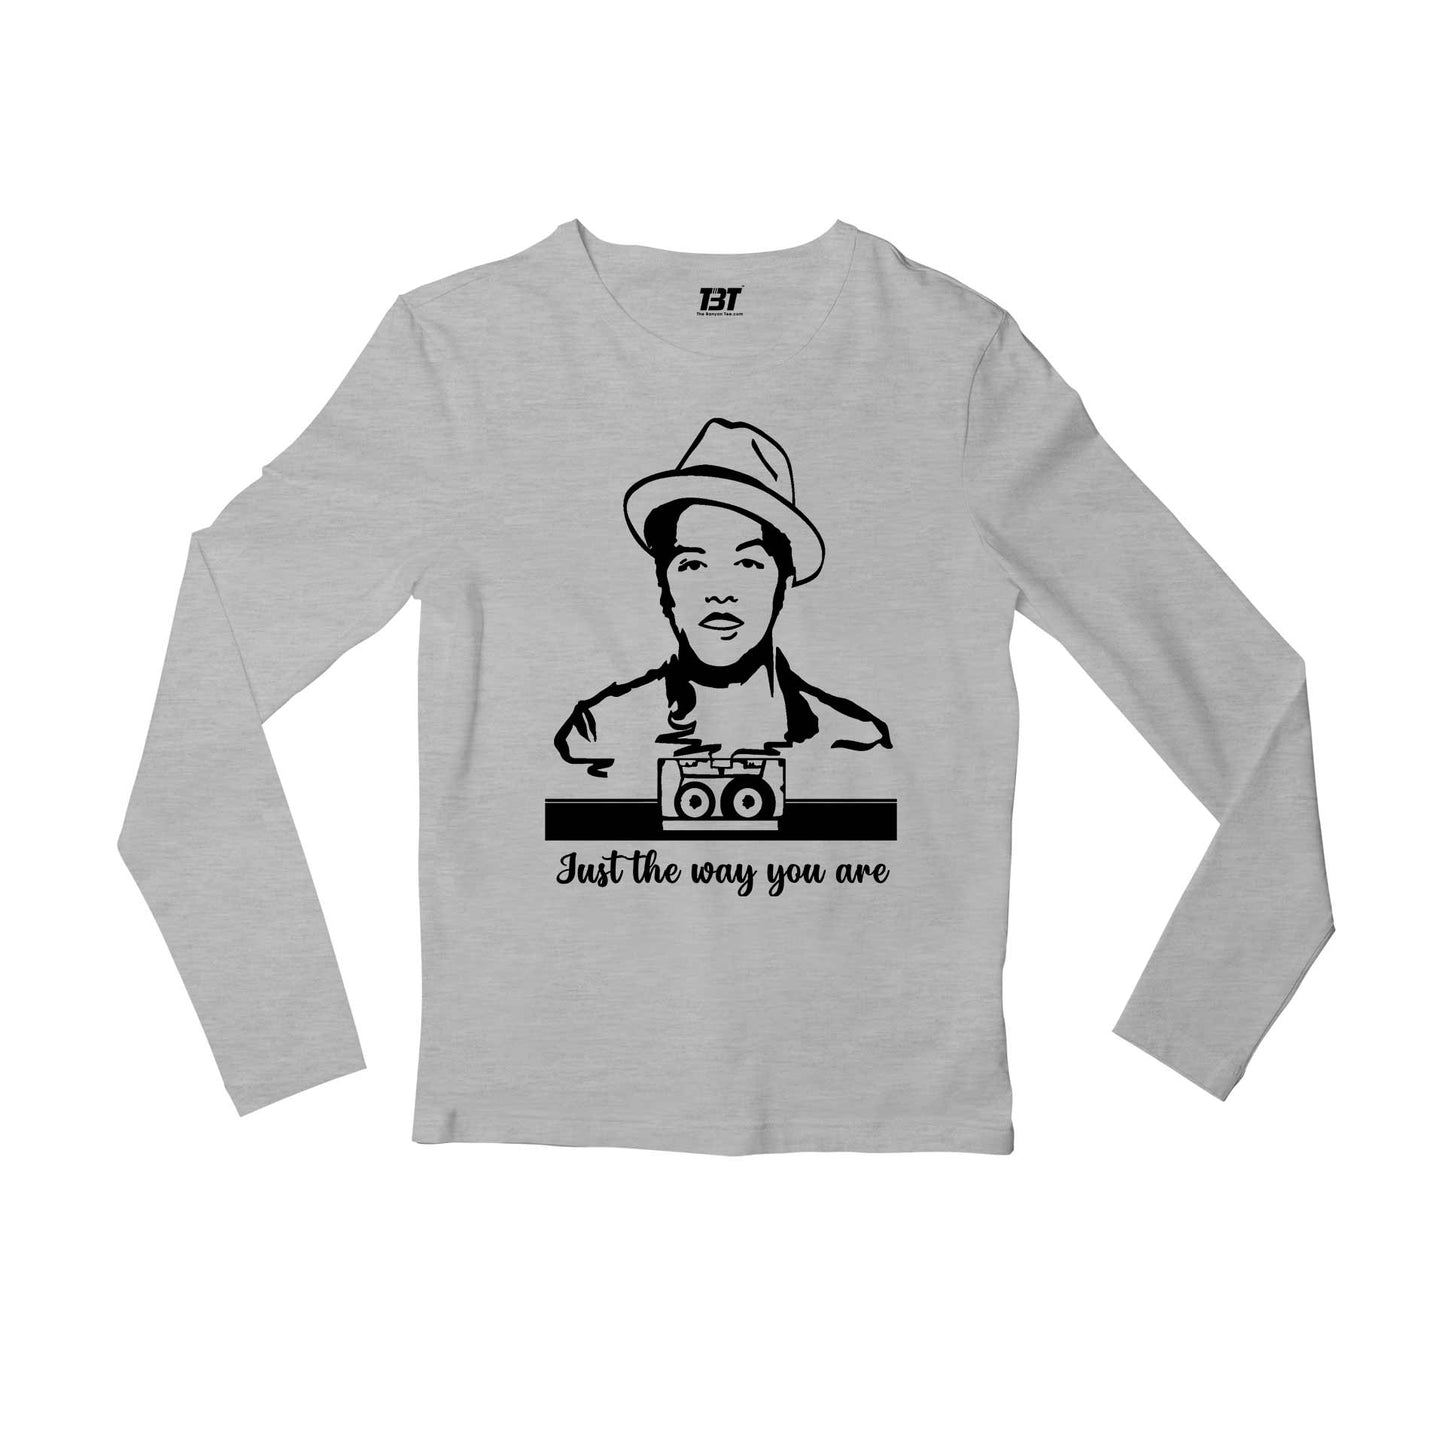 bruno mars just the way you are full sleeves long sleeves music band buy online india the banyan tee tbt men women girls boys unisex gray